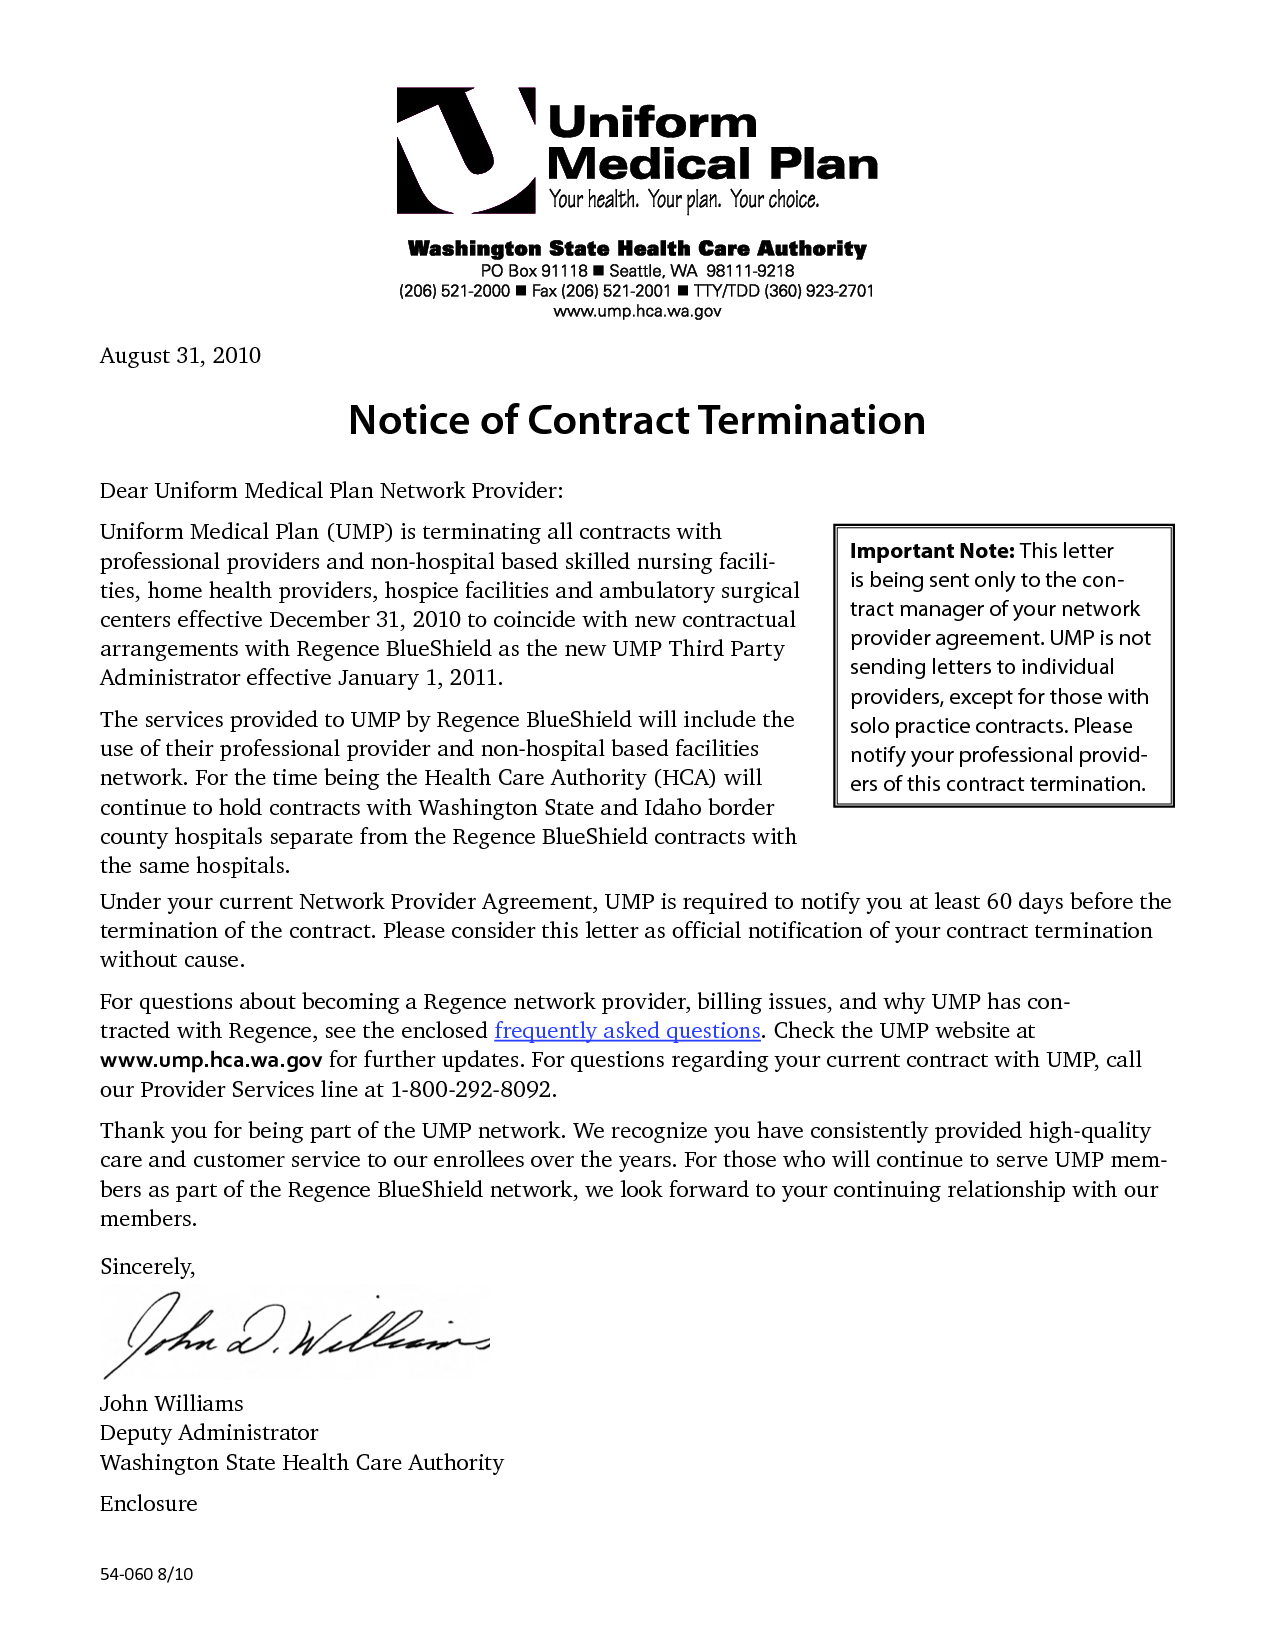 Business Contract Termination Letter Template - 20 Luxury Termination Service Agreement Letter Sample